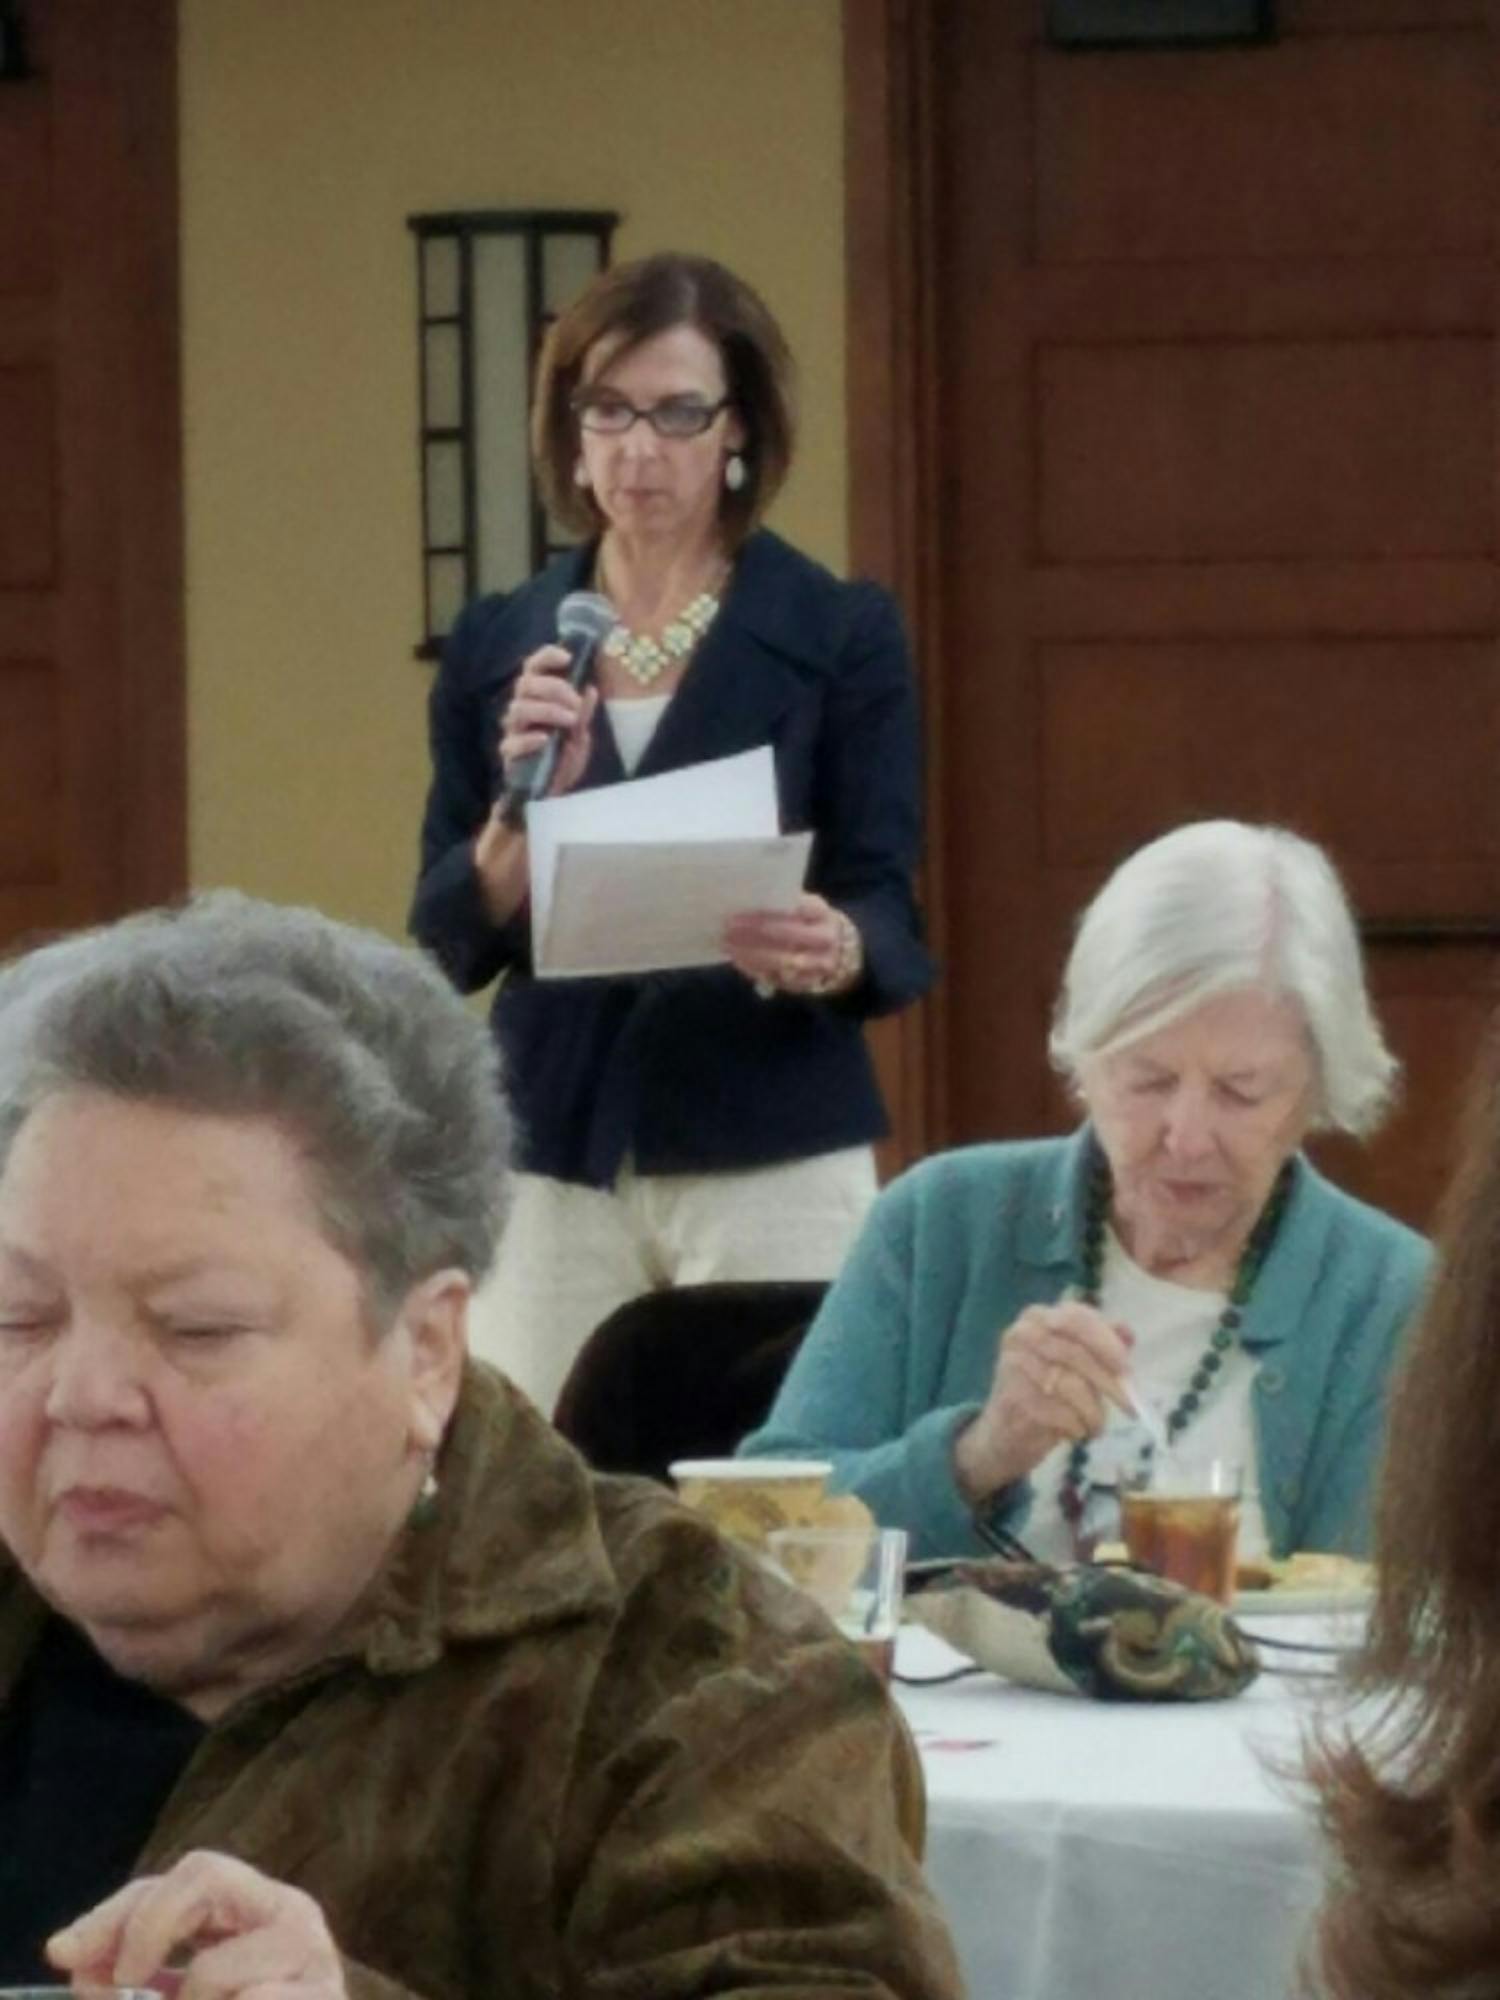 Stacey Yusko, the executive director of the Chapel Hill-Carrboro Meals on Wheels, speaks at a celebration event.